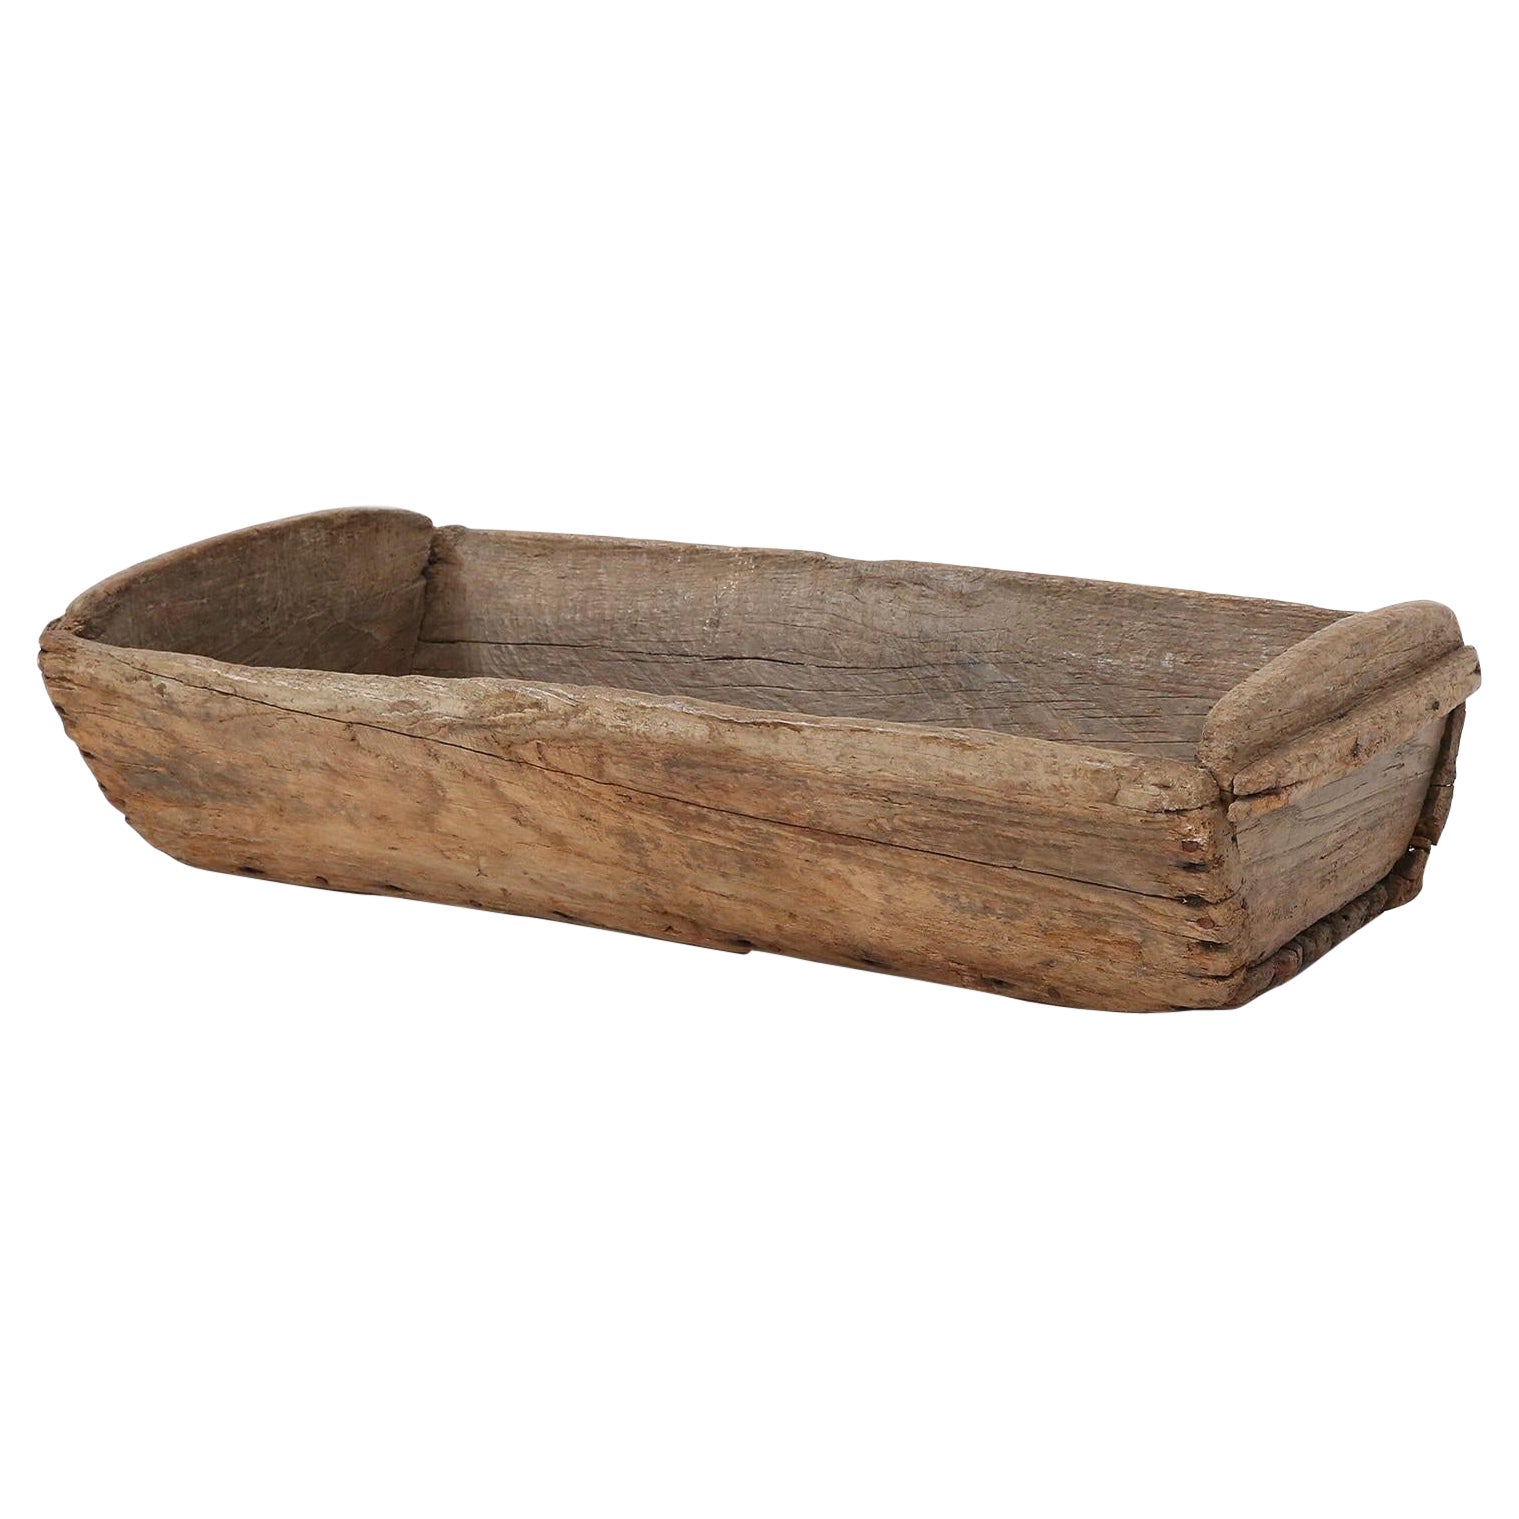 19th century rustic trough For Sale